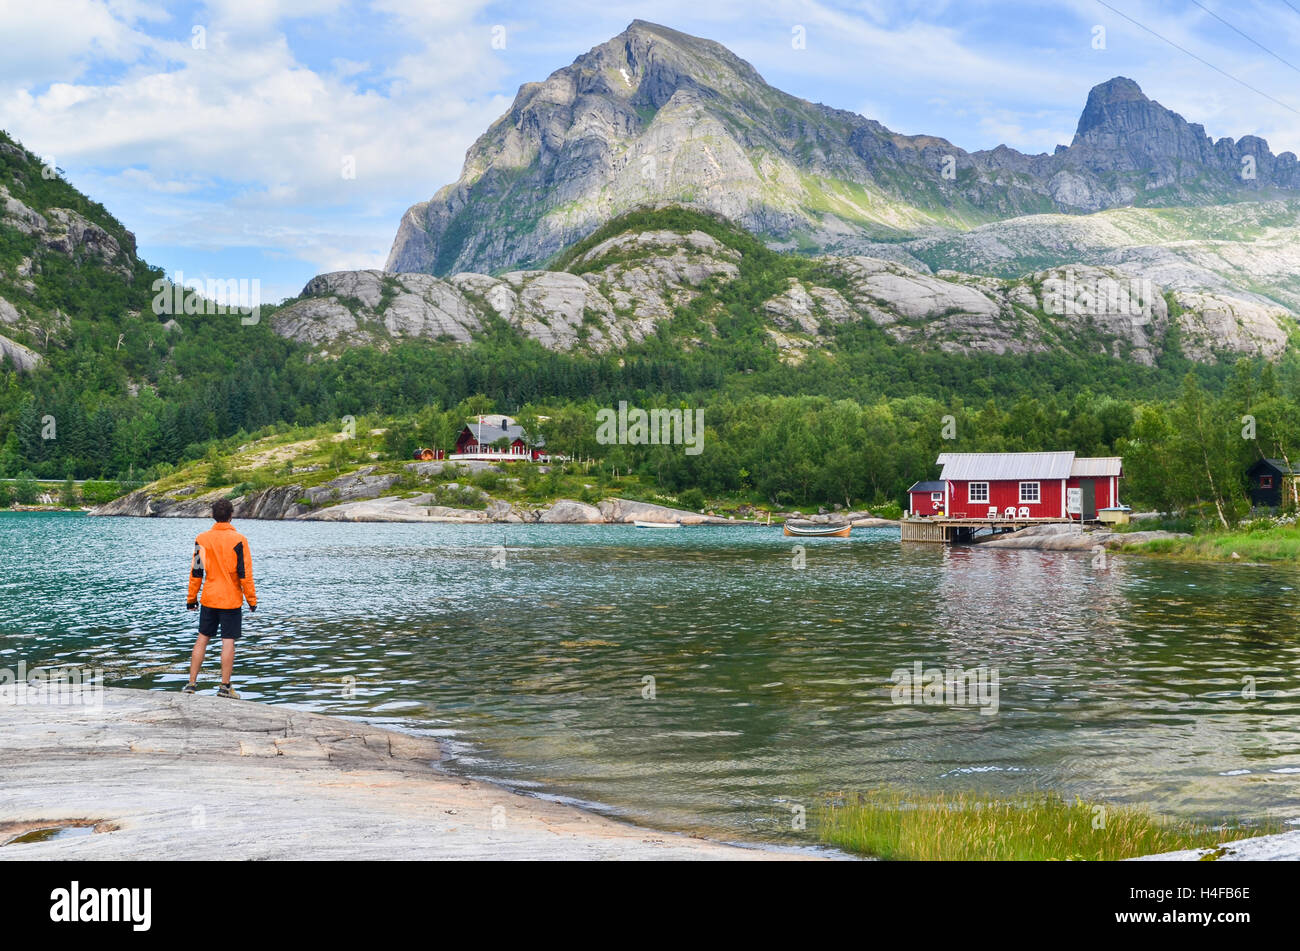 Explorer and cabin by the fjord in Northern Norway: outdoors, fjords and mountains Stock Photo